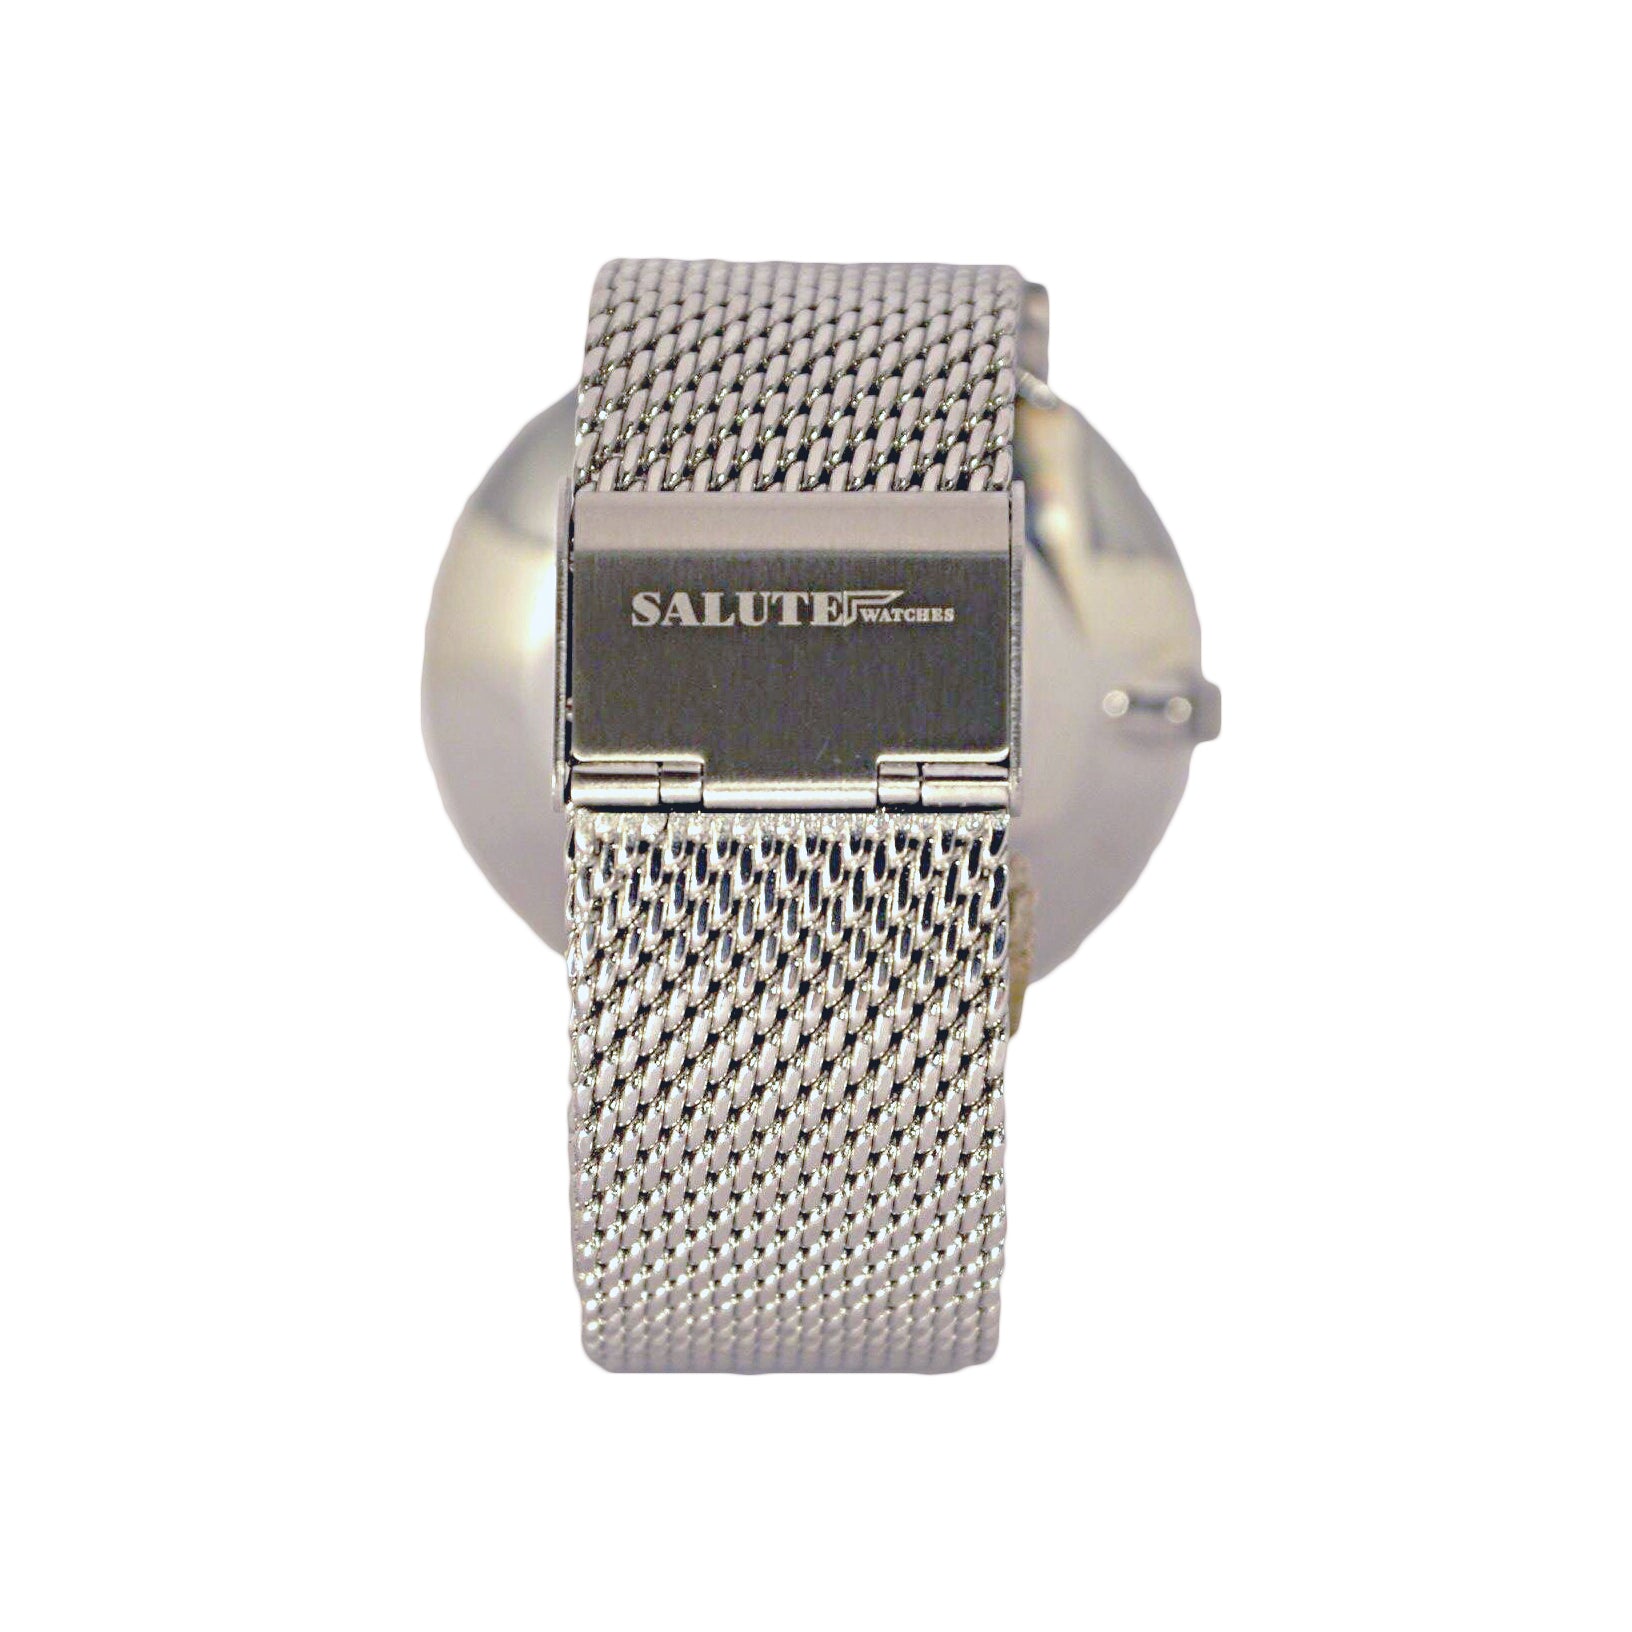 Salute Silver features premium stainless steel casing accompanied with a precise Miyota quartz movement.